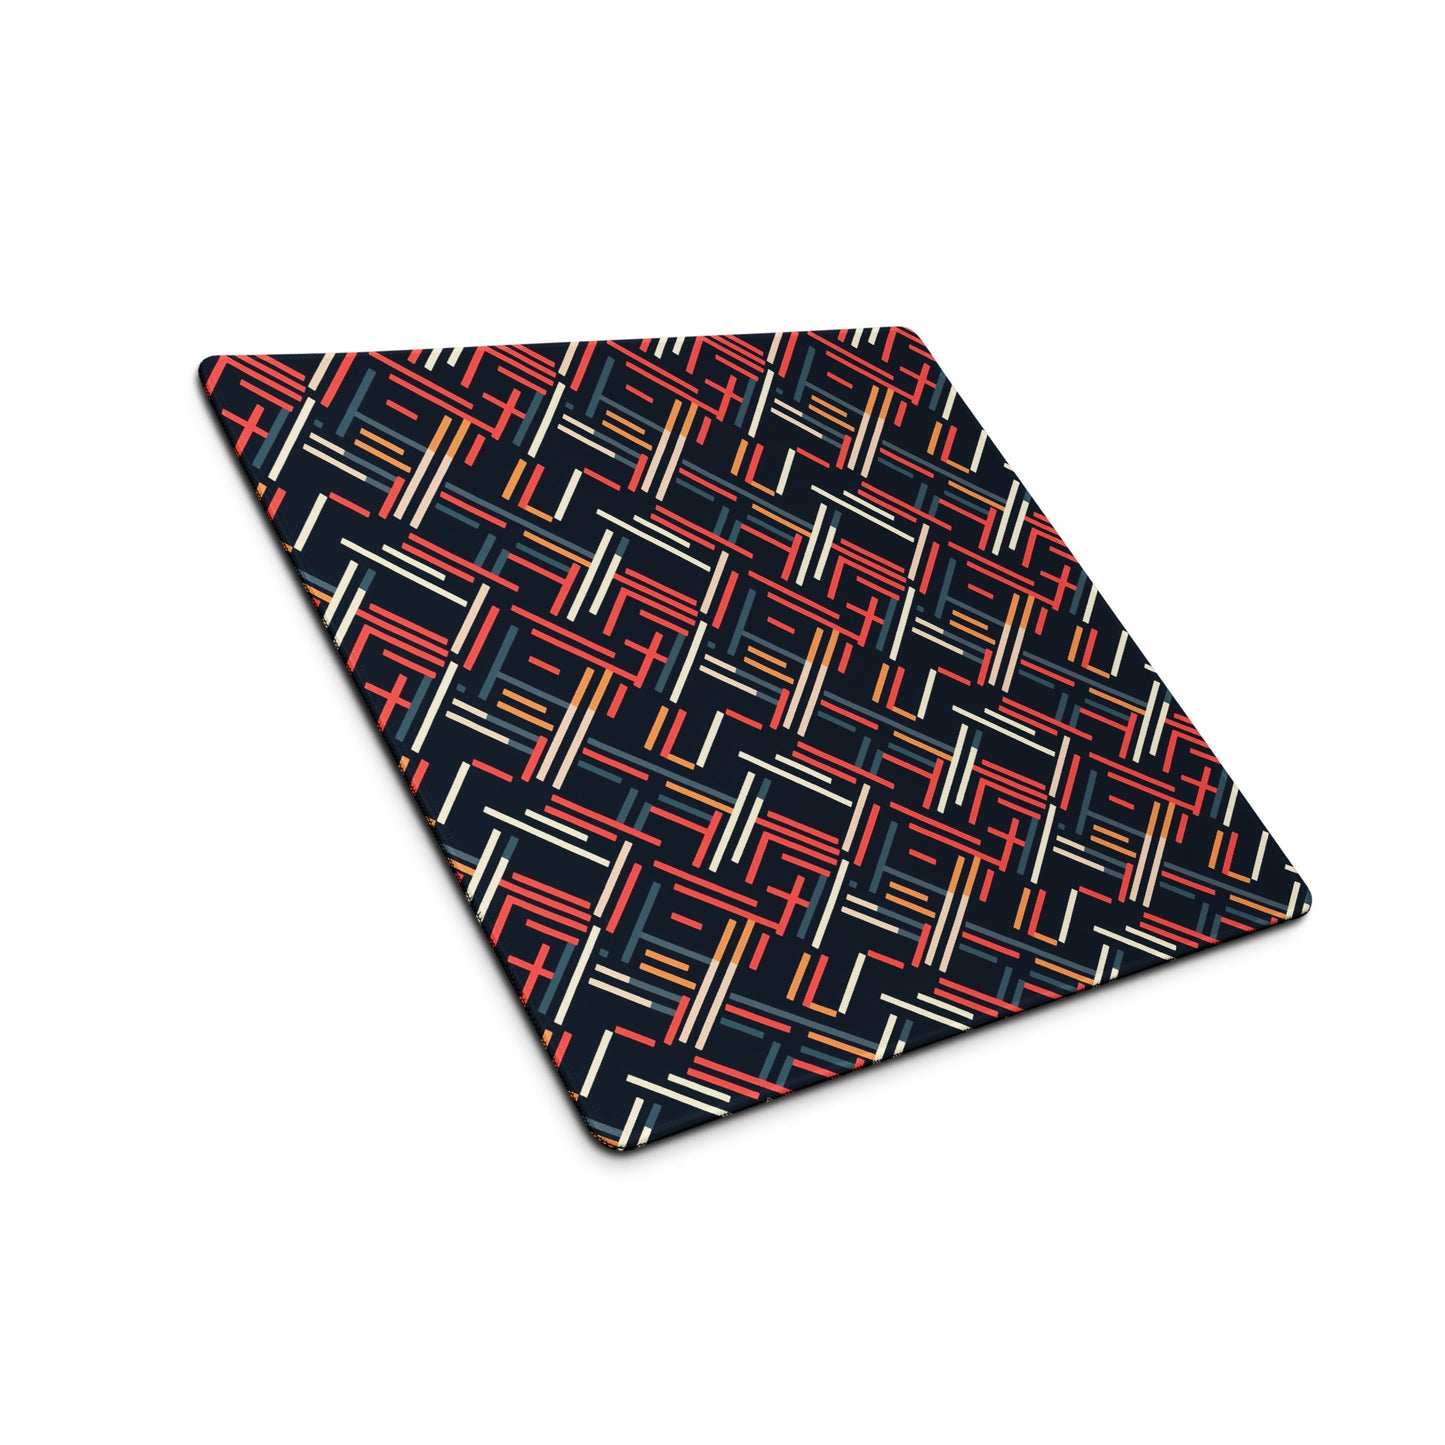 An 18" x 16" gaming desk pad with red, blue, white, and orange lines on a black background sitting at an angle.